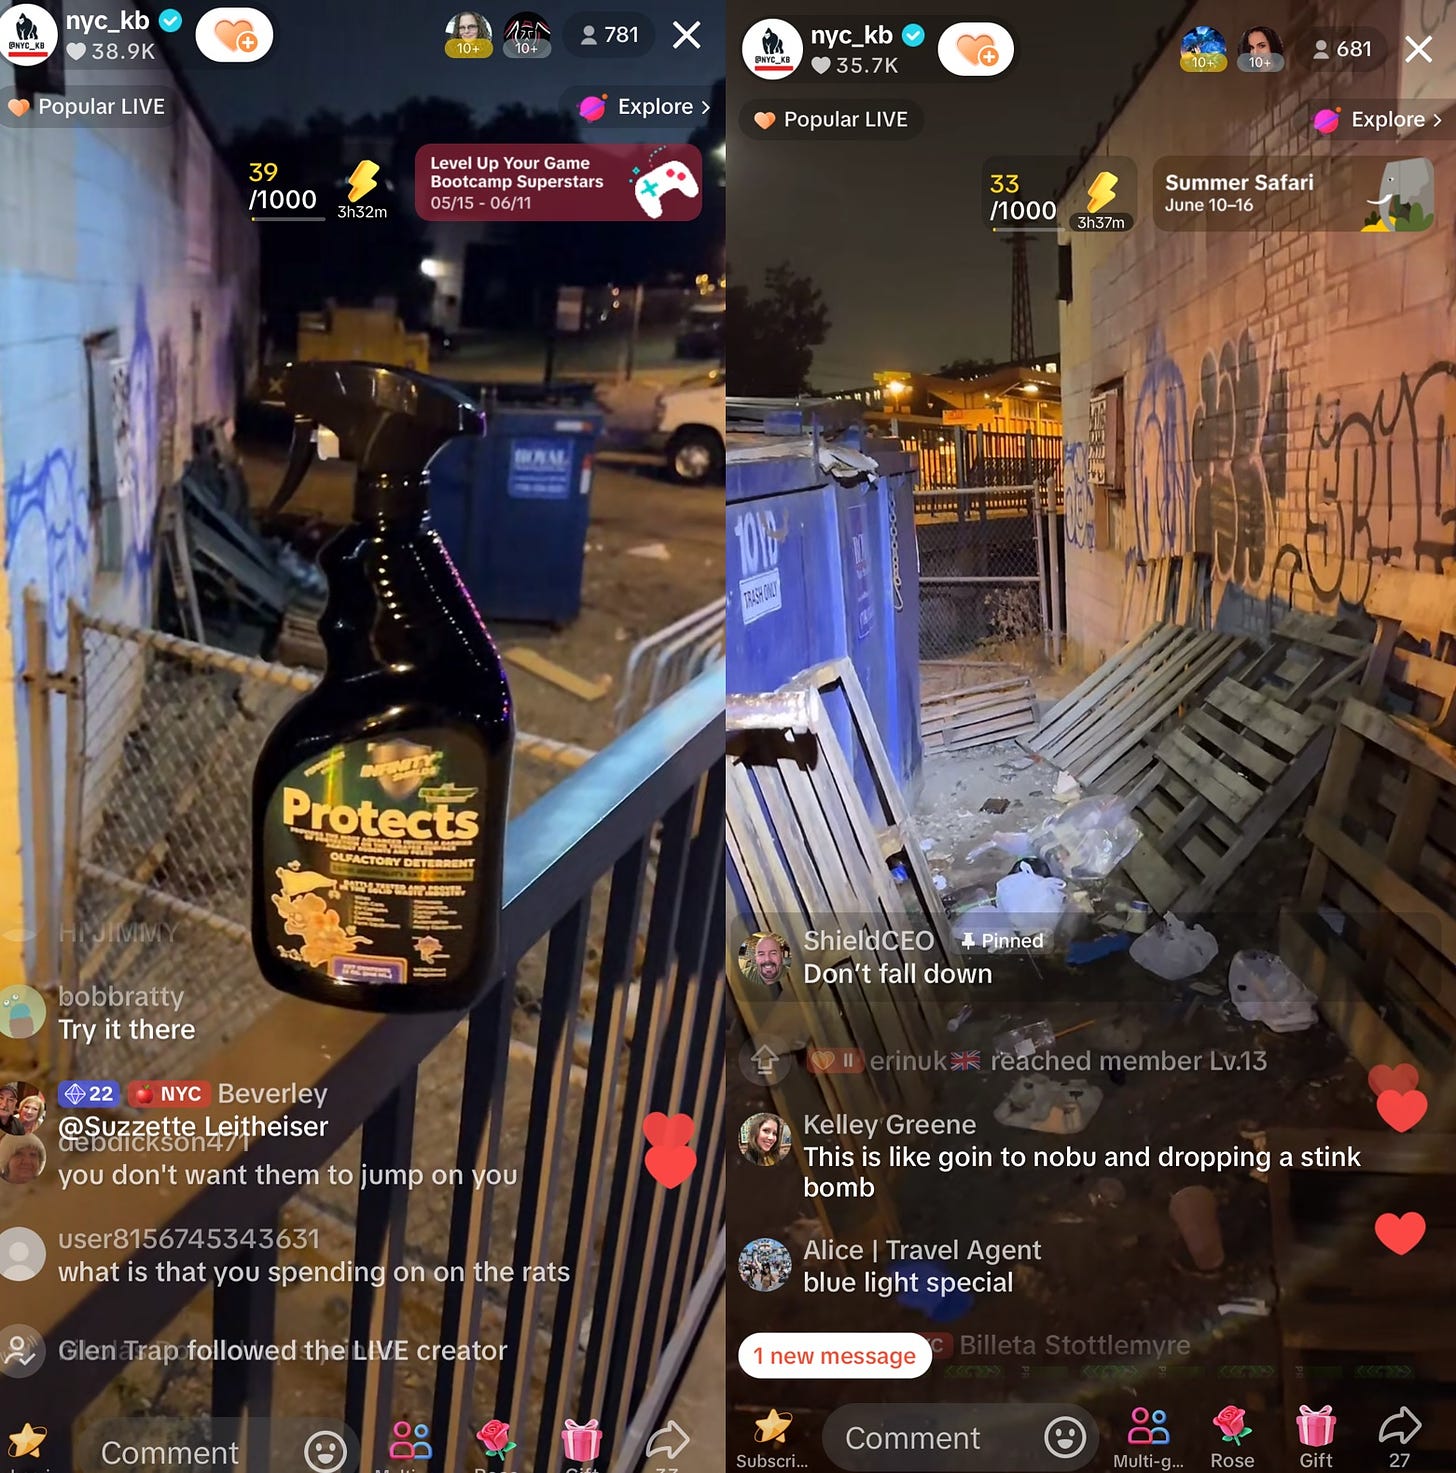 Two side-by-side TikTok screenshots from the nyc_kb account. The one on the left shows a spray bottle of some kind of "olfactory deterrent." In the background is a fence and a dumpster. In the second image, we're on the other side of the dumpster and there are rats in some trash and wooden pallets. I've commented there and it says "This is like goin to nobu and dropping a stink bomb."